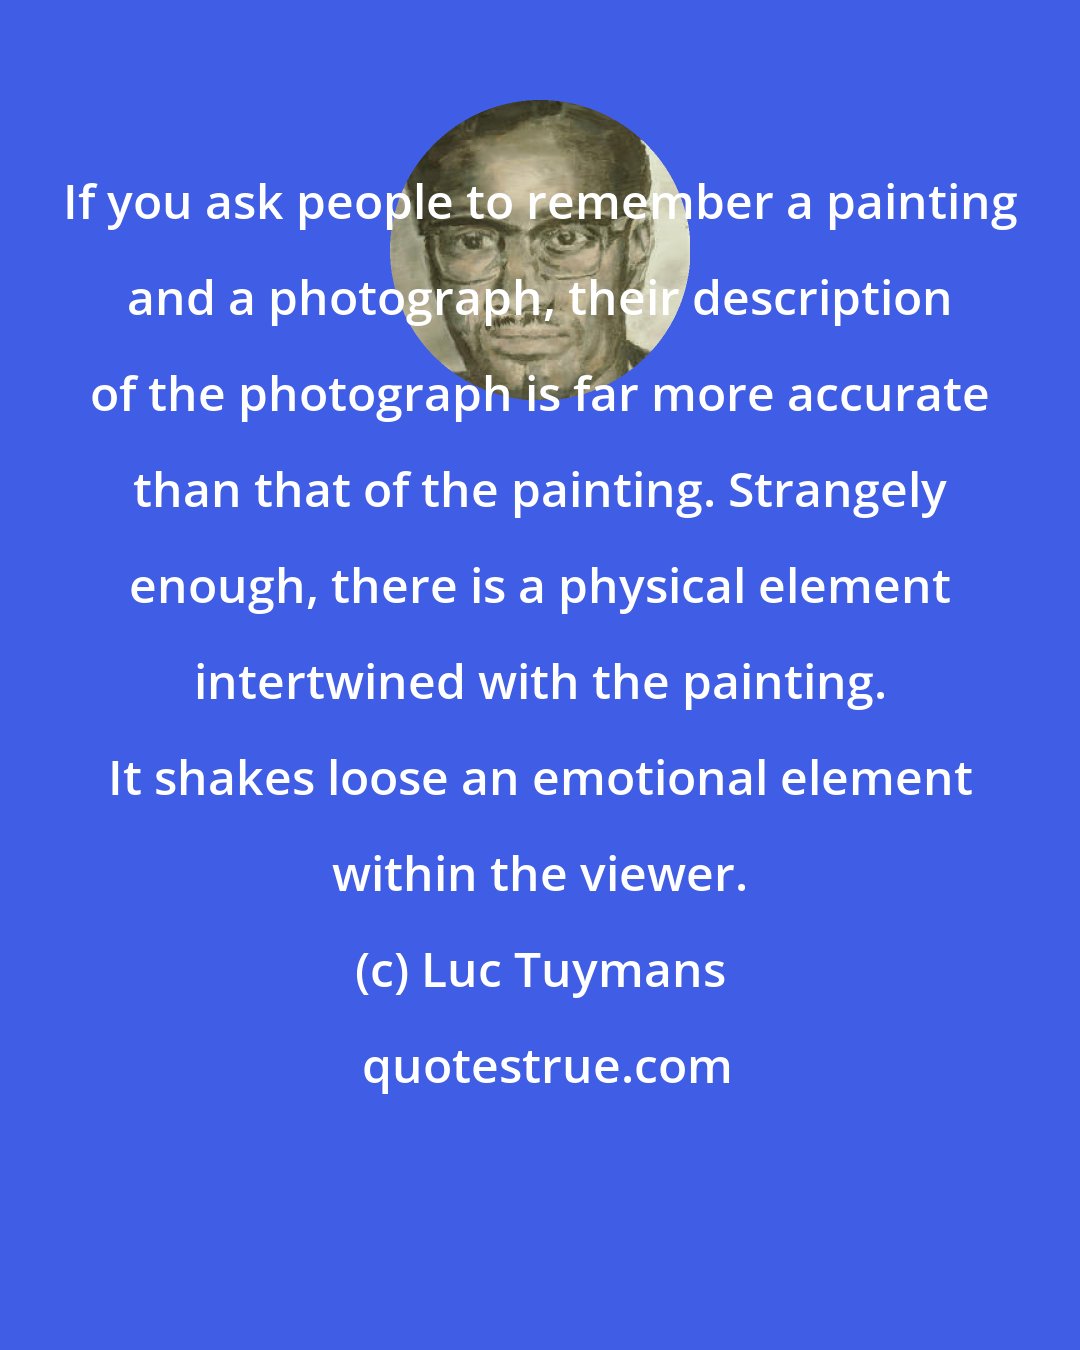 Luc Tuymans: If you ask people to remember a painting and a photograph, their description of the photograph is far more accurate than that of the painting. Strangely enough, there is a physical element intertwined with the painting. It shakes loose an emotional element within the viewer.